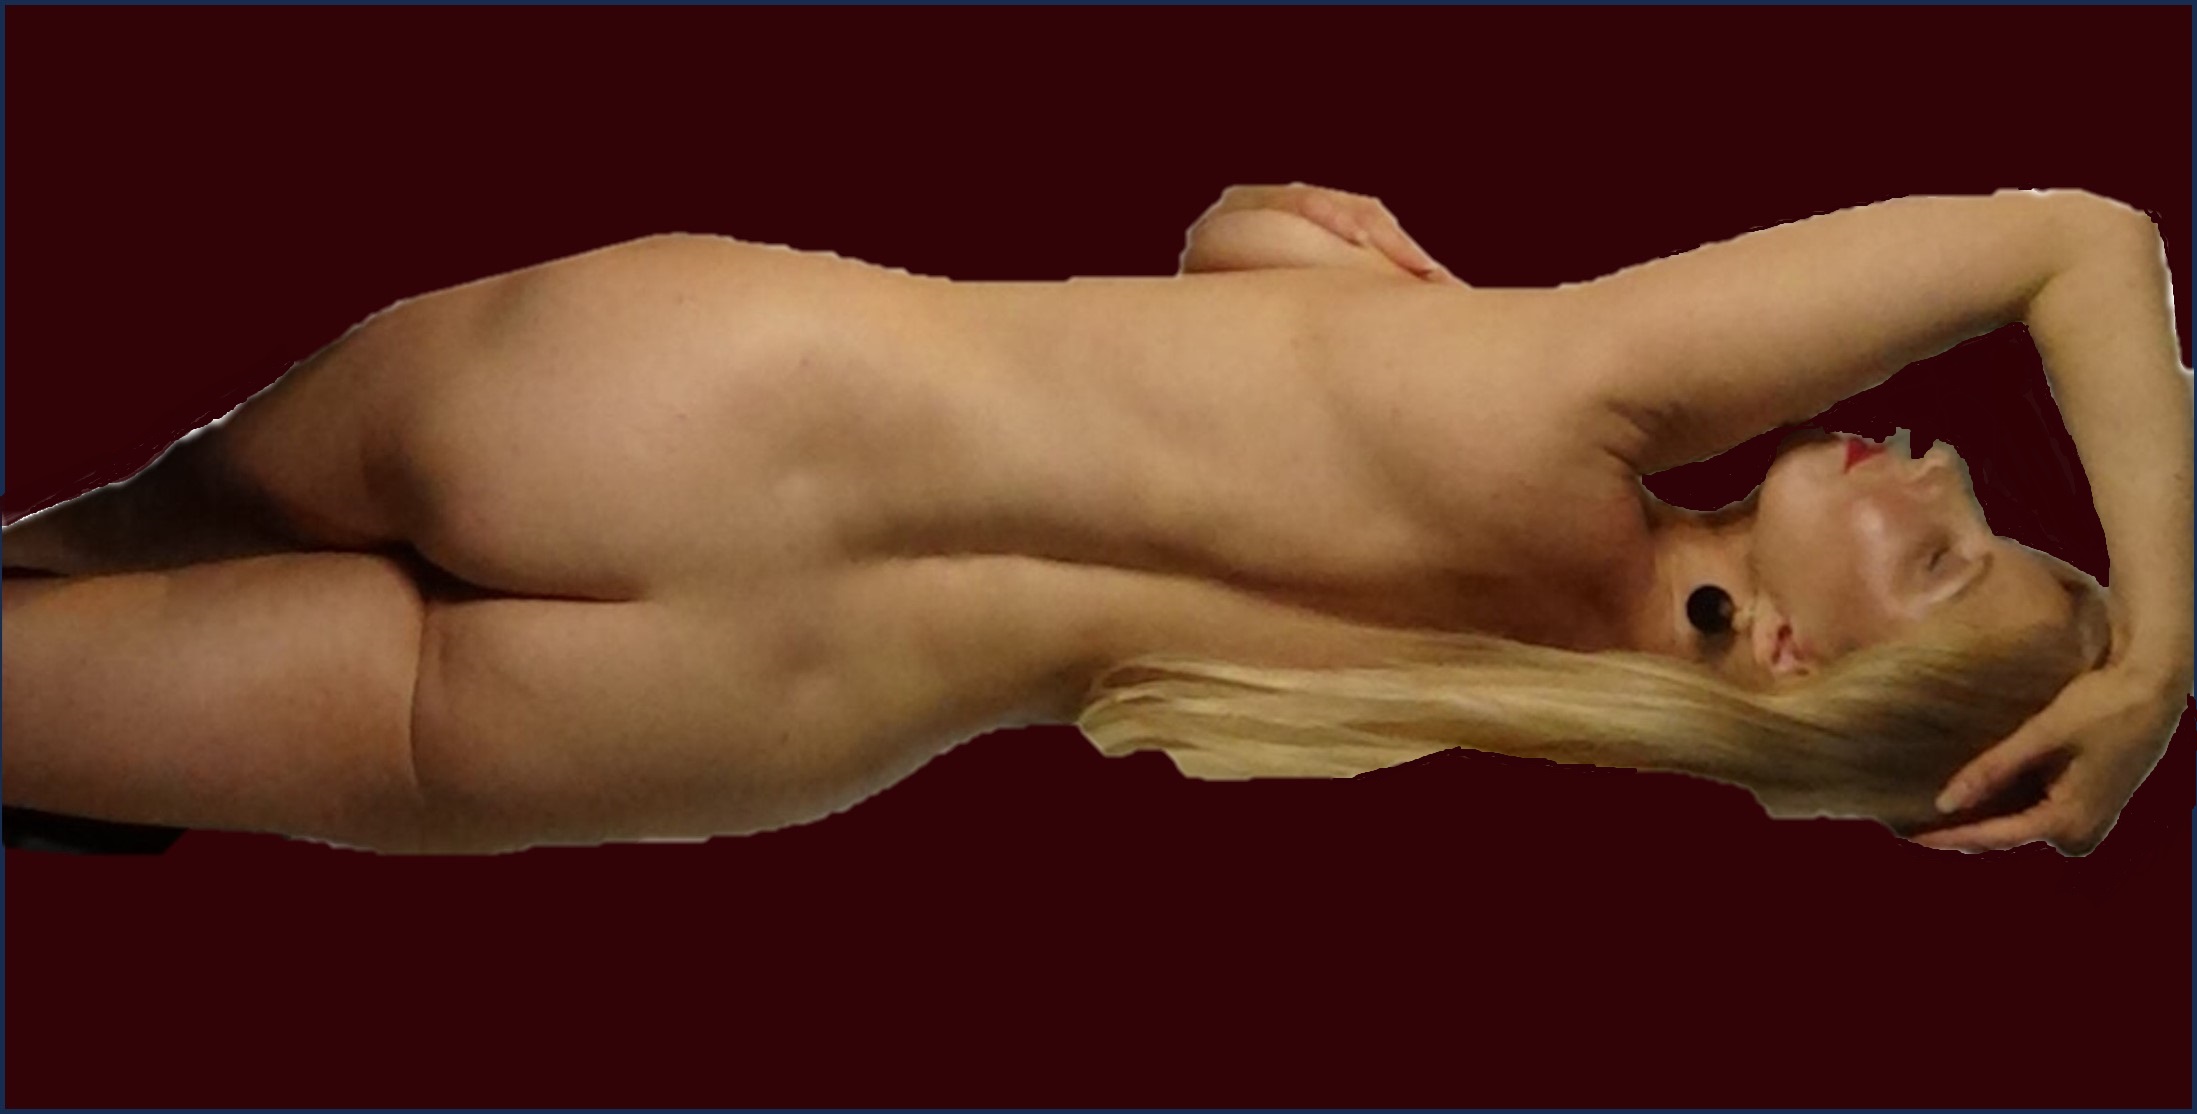 Topless Tantric Massage is a great introduction to really sensual massages